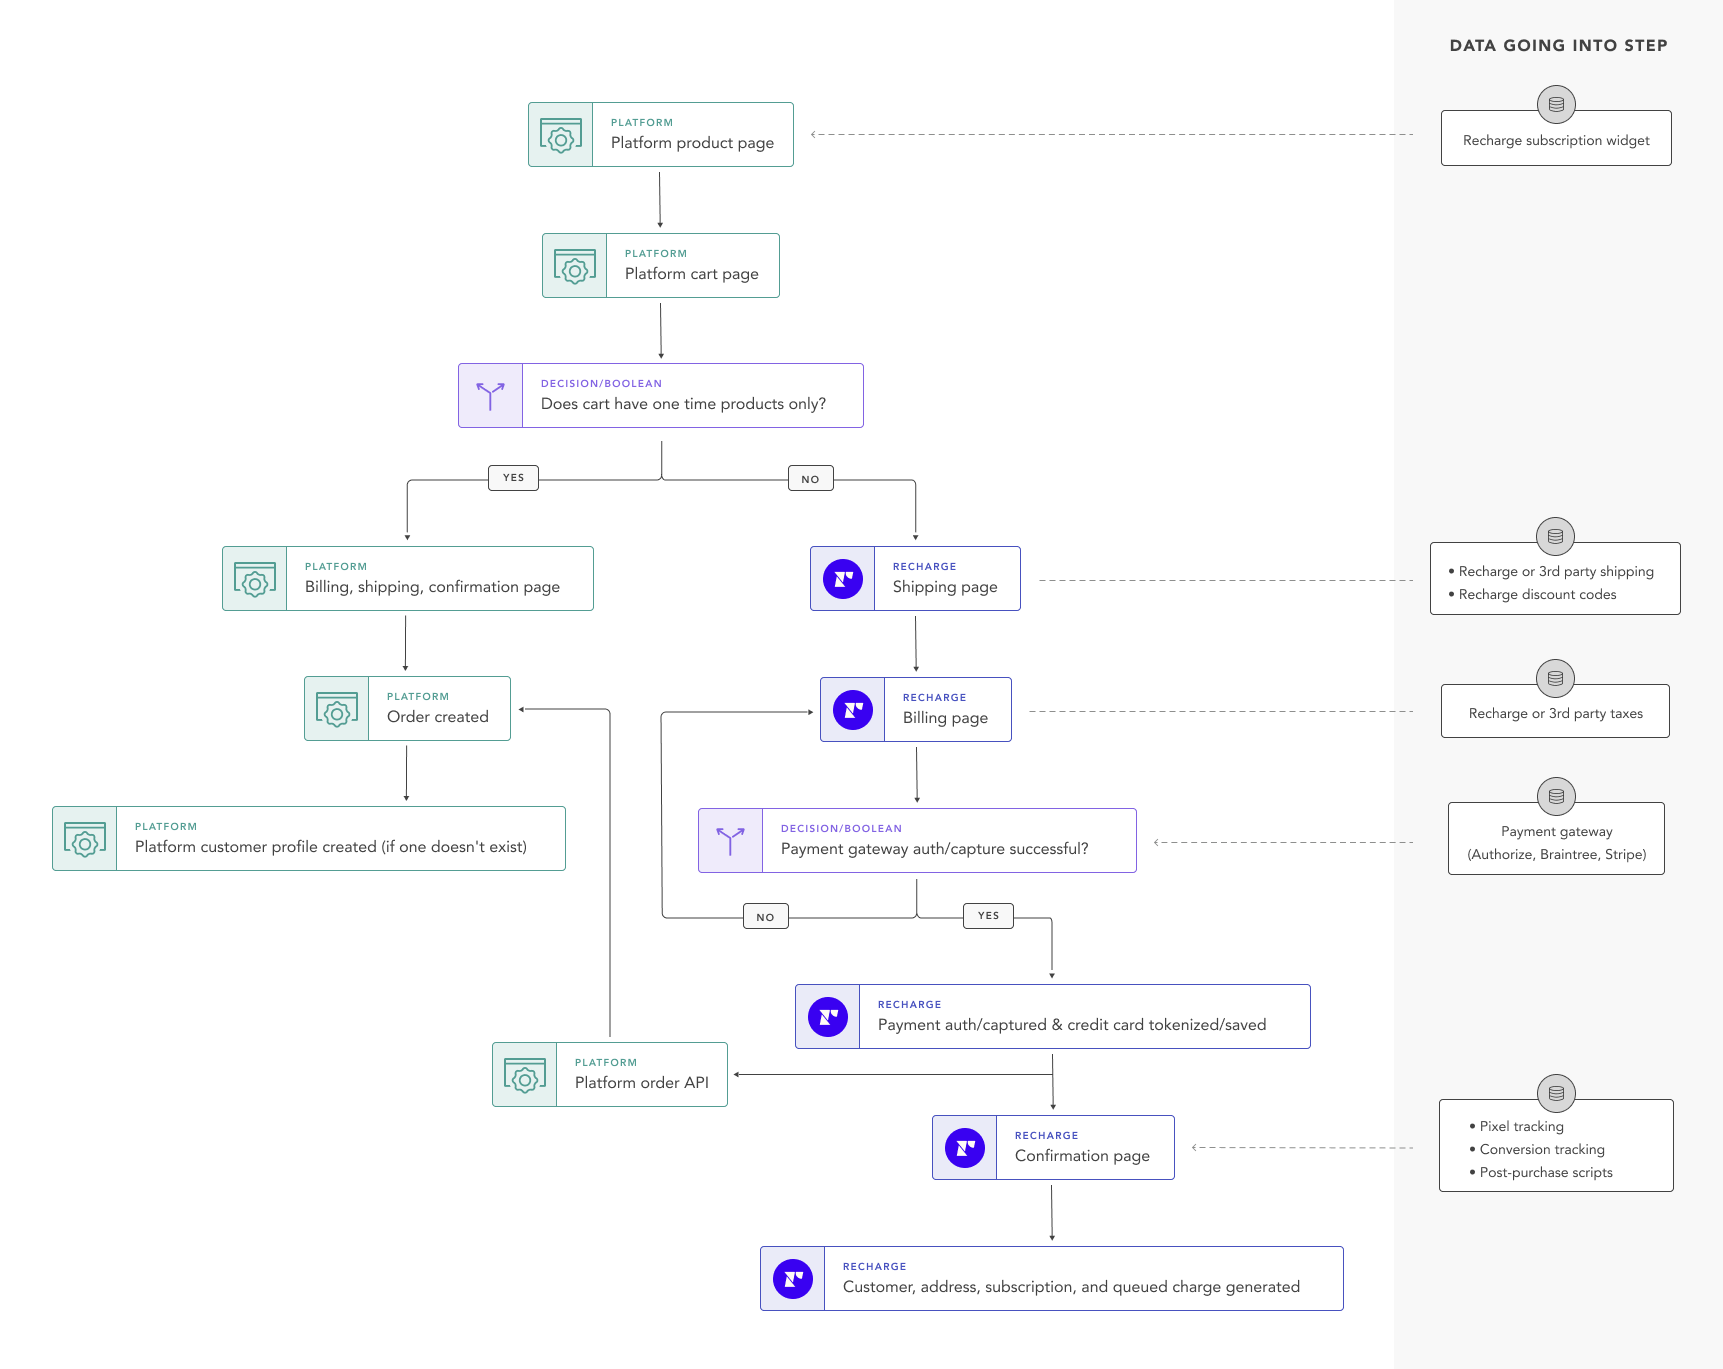 Flowchart for data processed between Recharge and the ecommerce platform for first-time orders